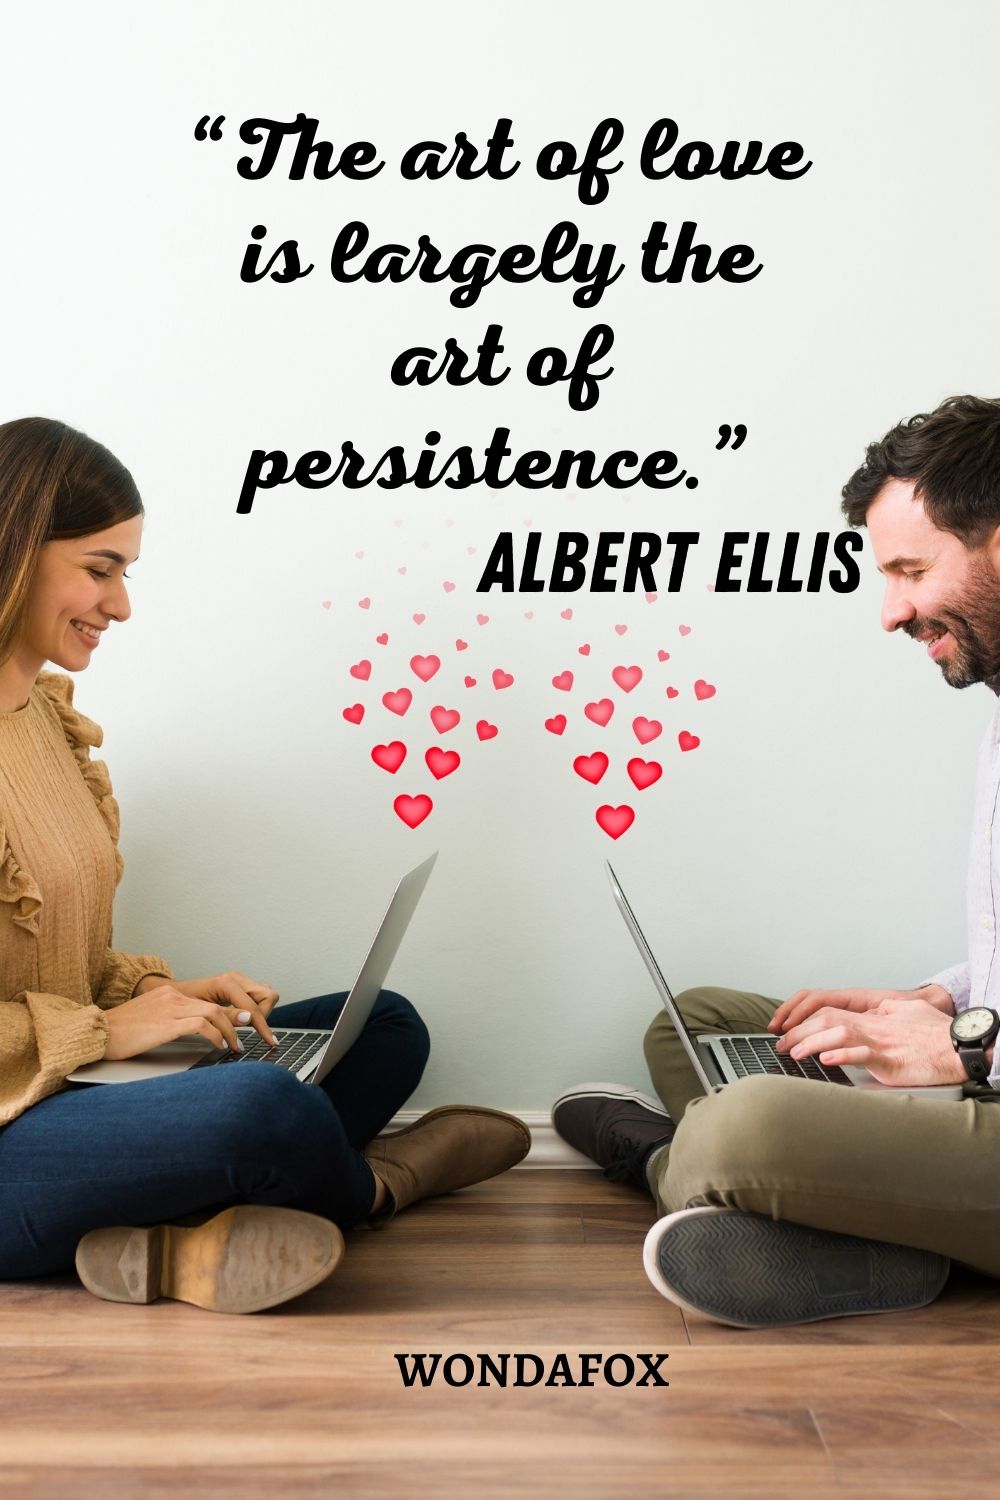 “The art of love is largely the art of persistence.”
Albert Ellis